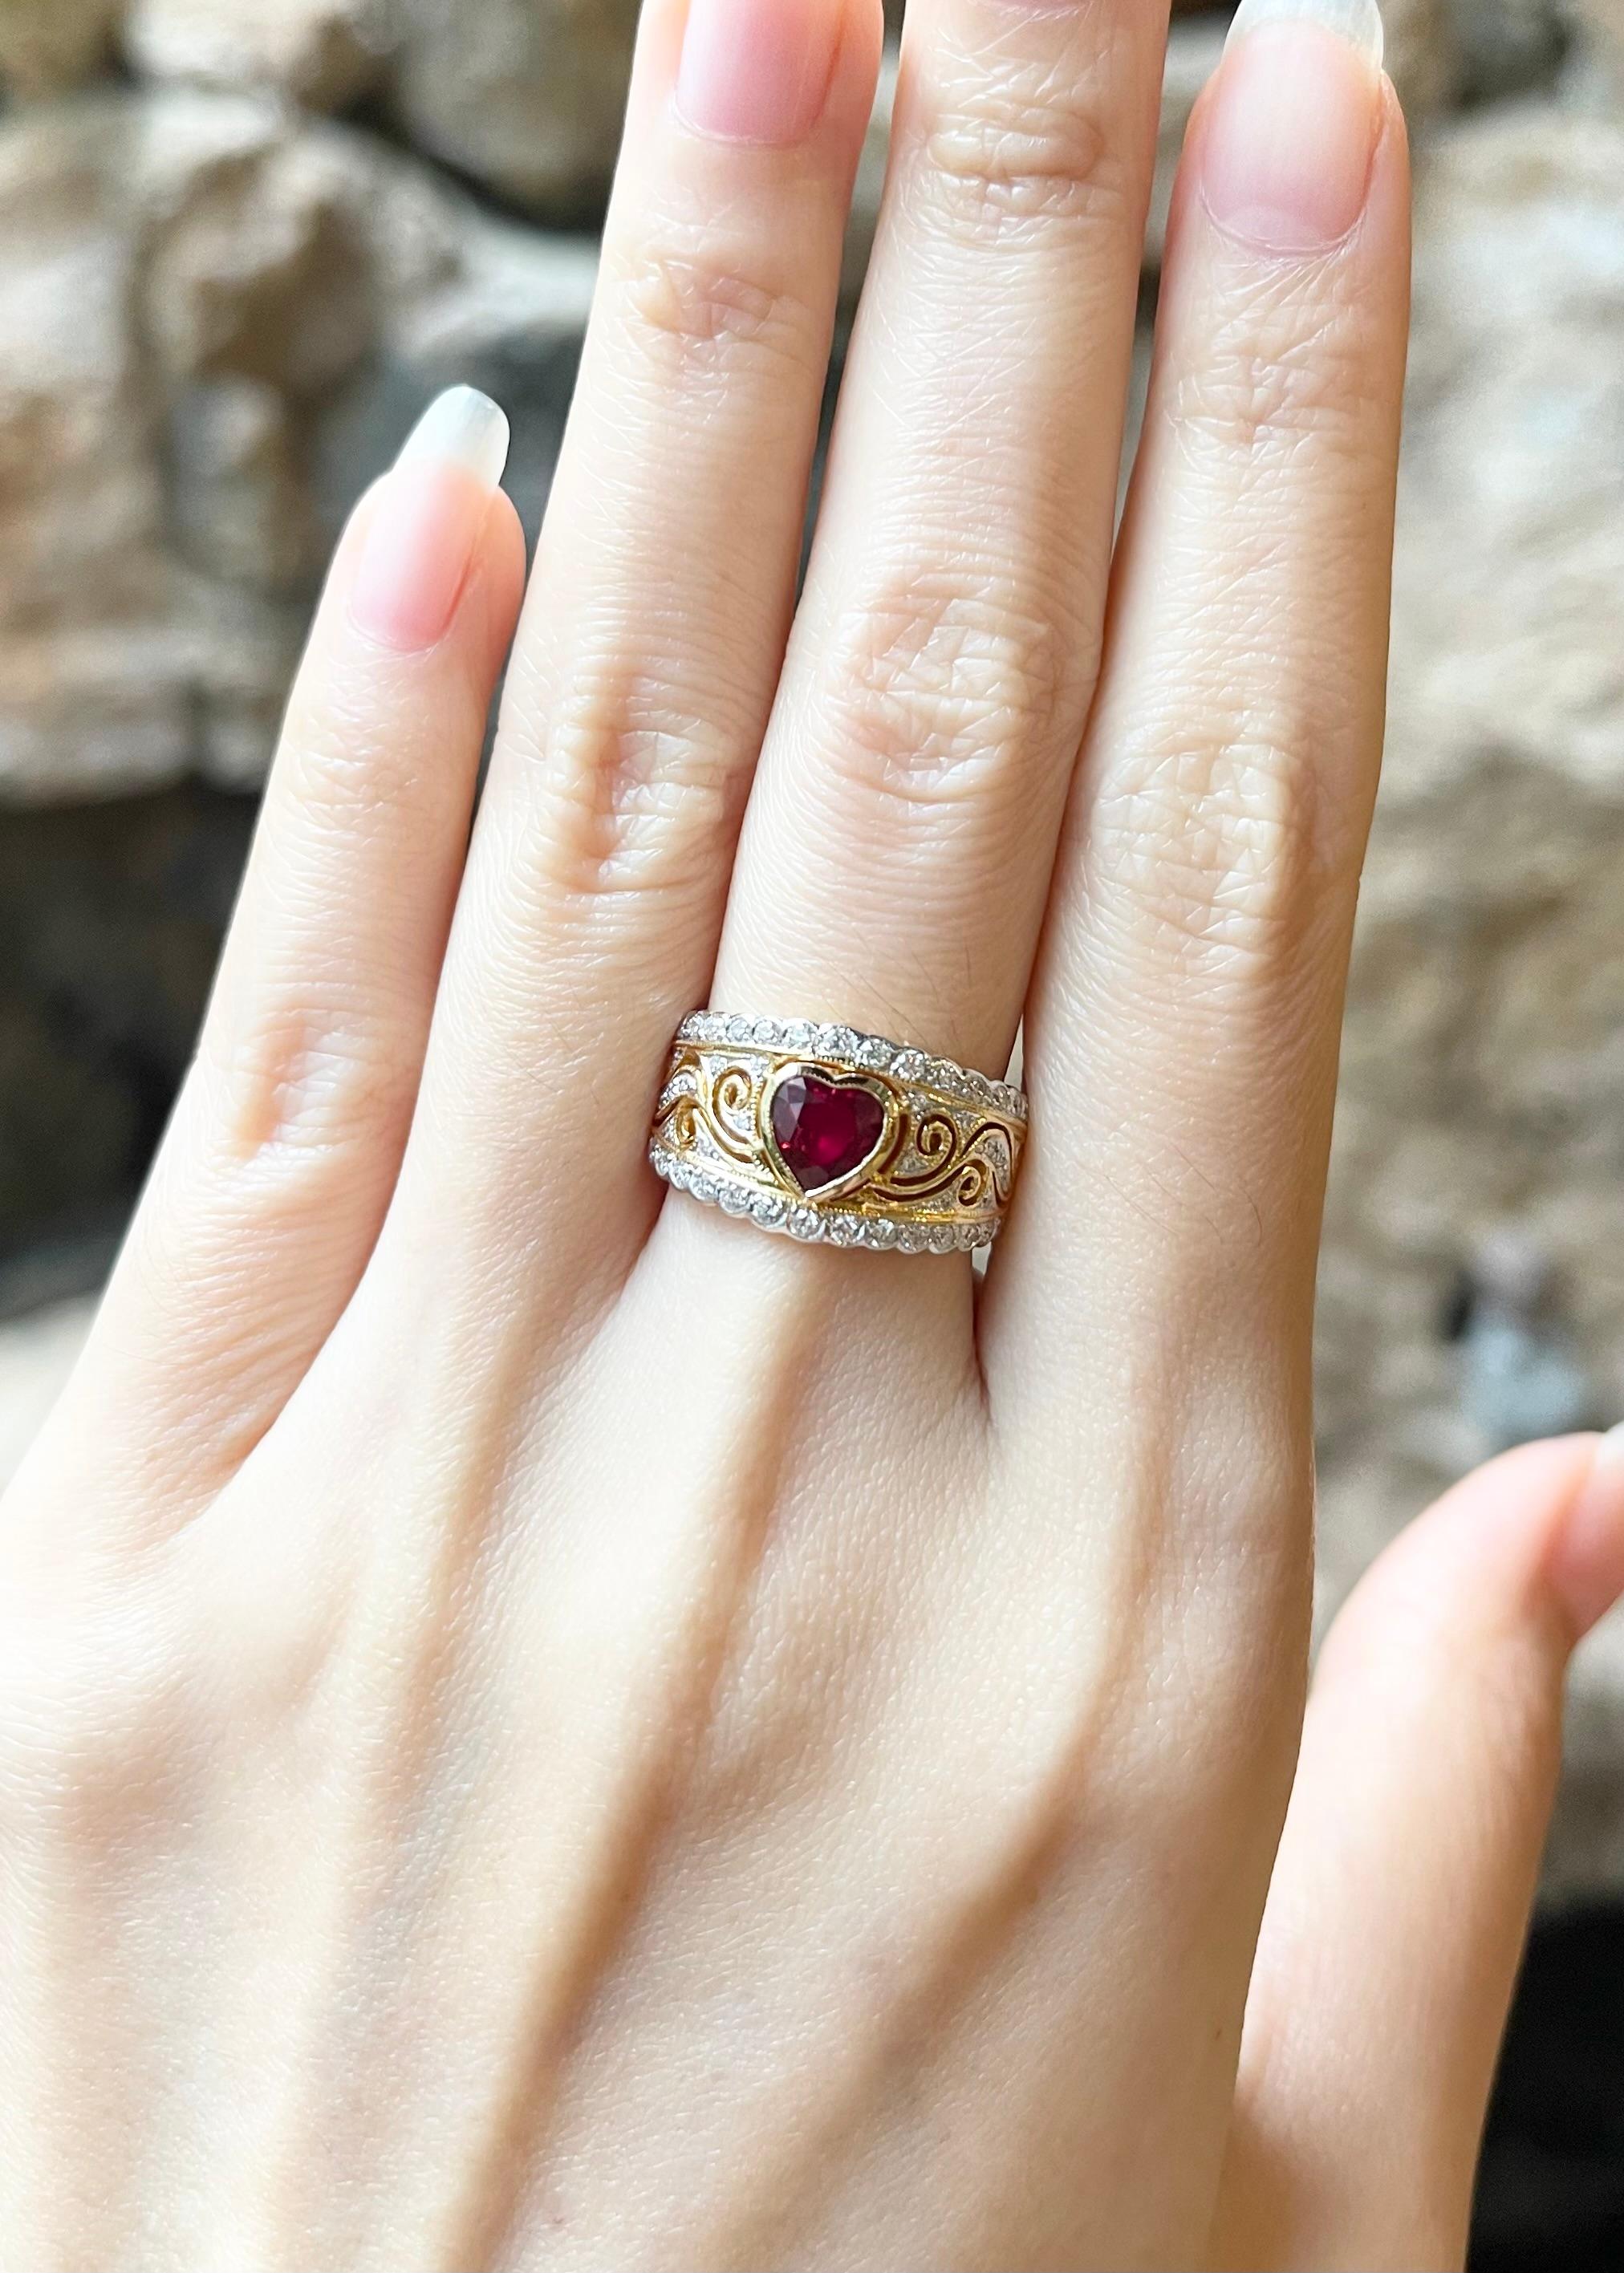 Ruby 0.95 carat with Diamond 0.39 carat Ring set in 18K Gold Settings

Width:  1.9 cm 
Length: 1.1 cm
Ring Size: 53
Total Weight: 7.45 grams

